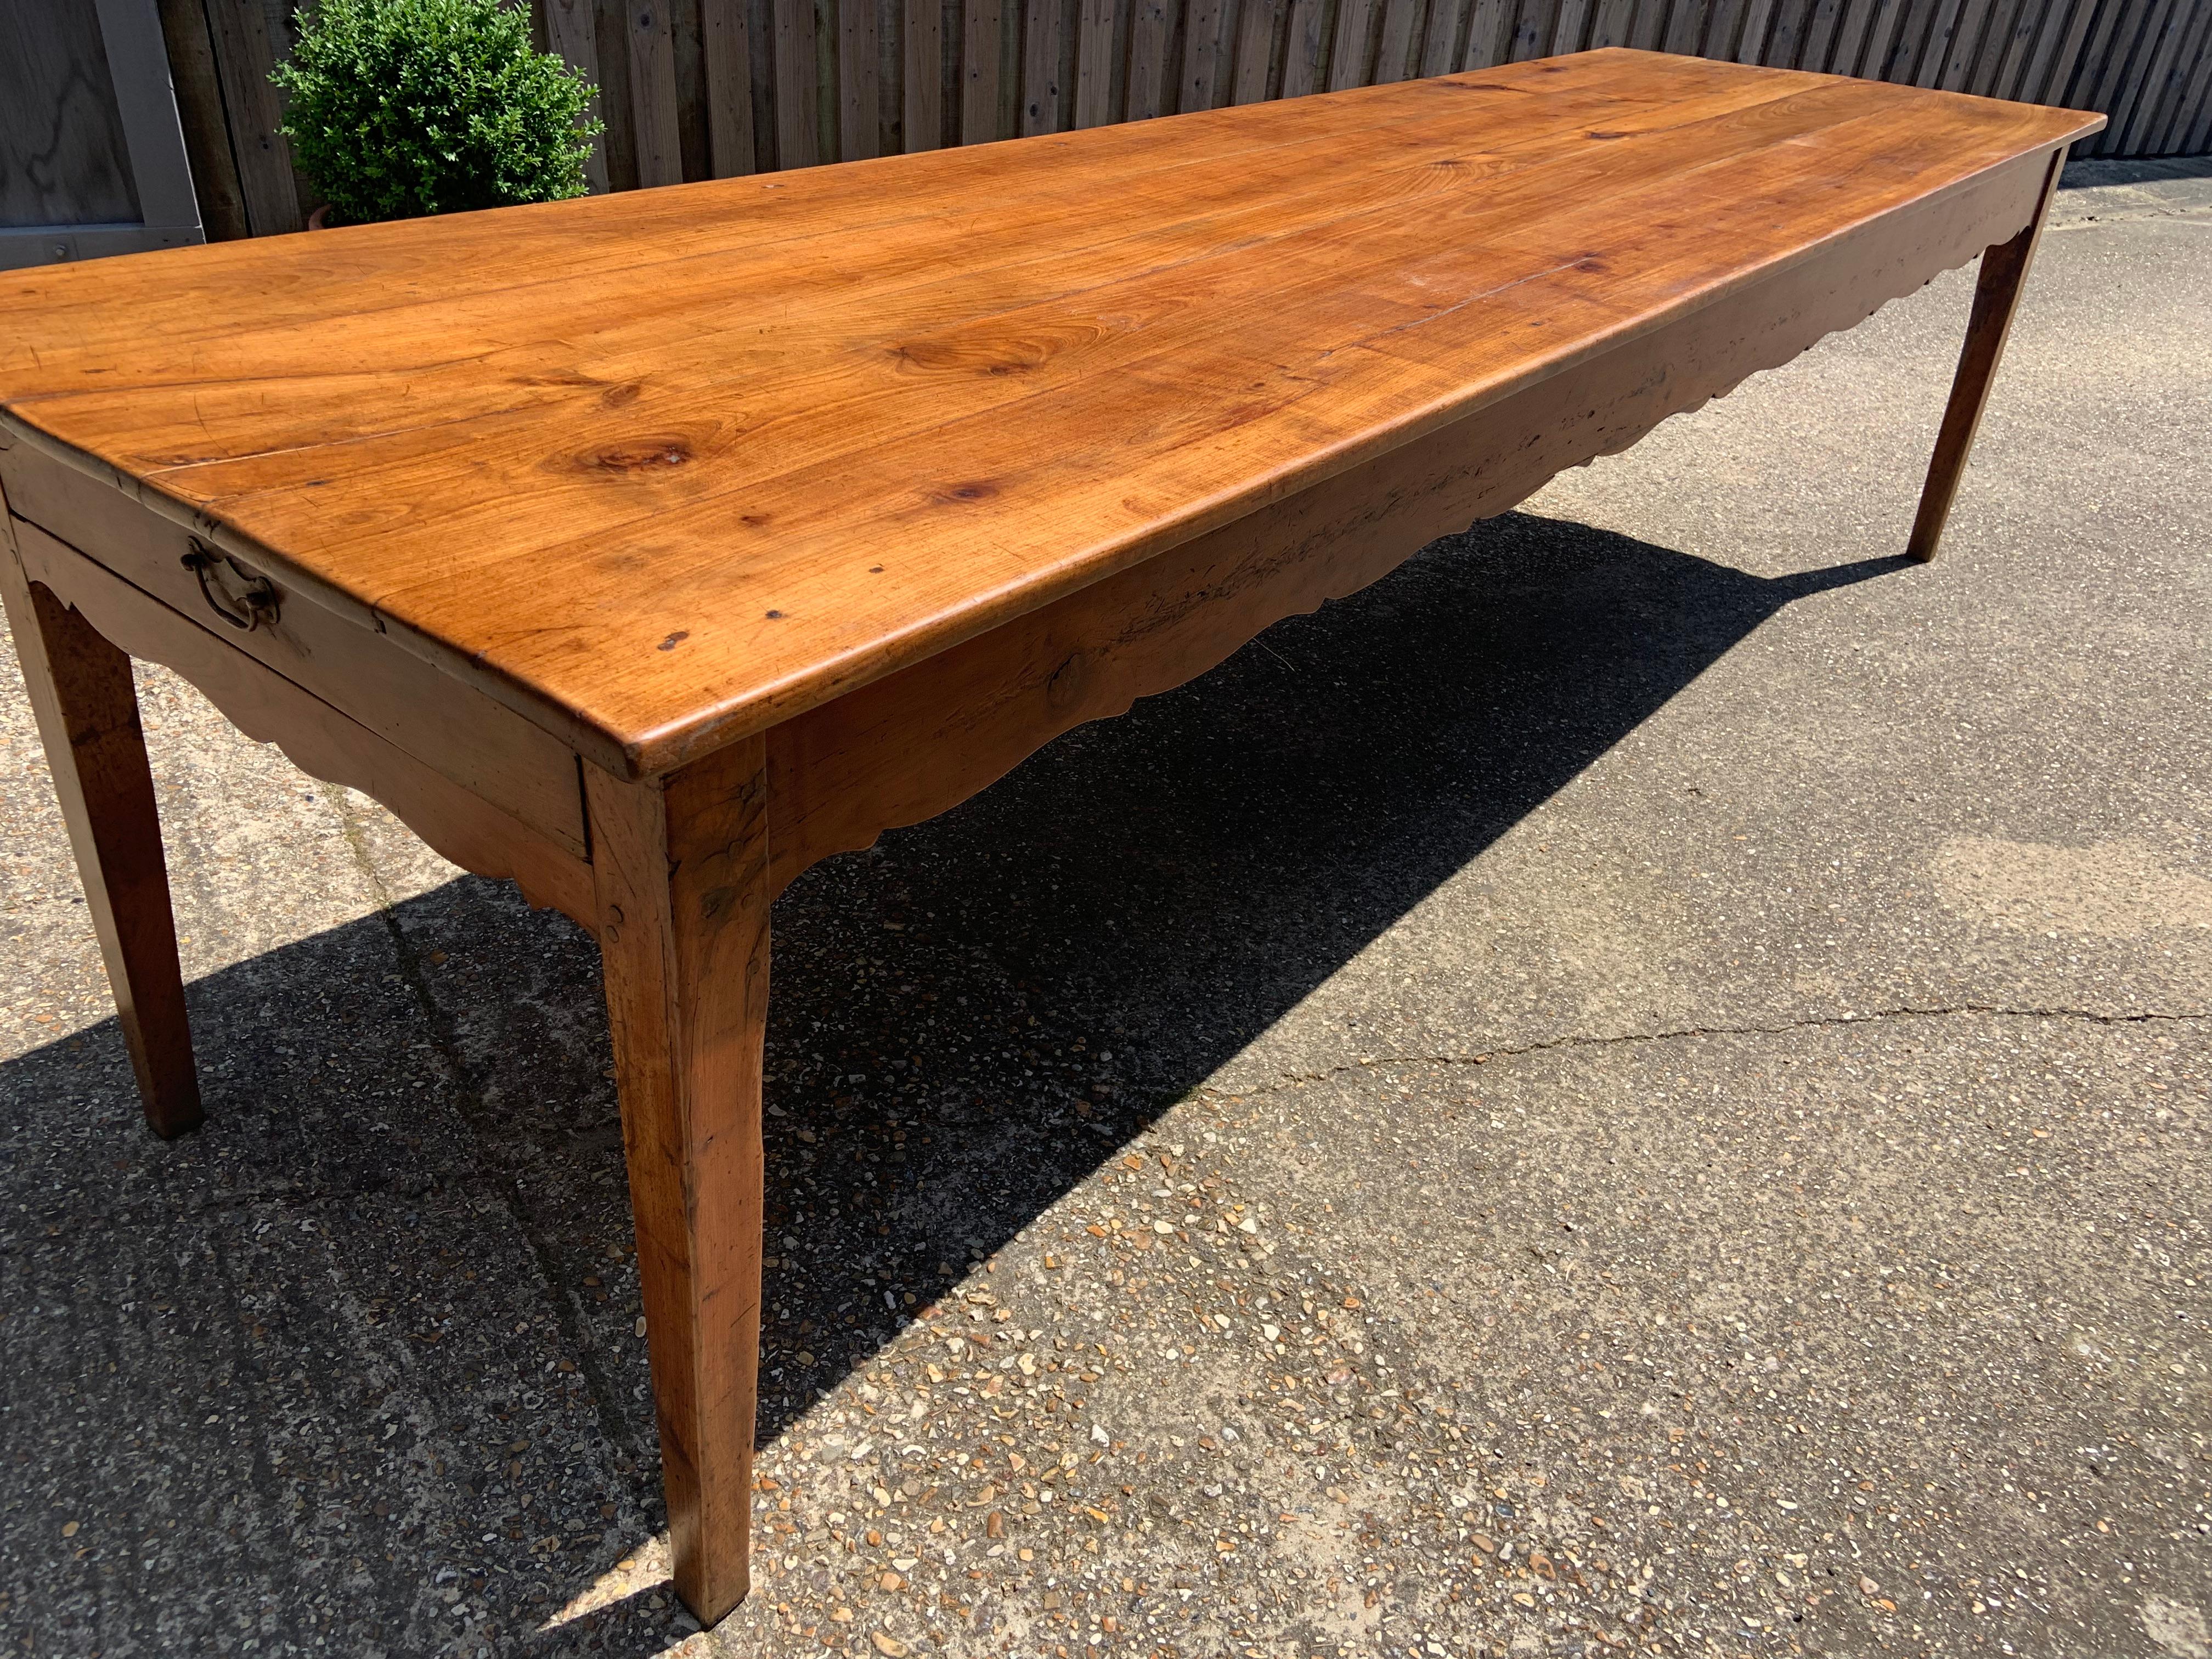 Large 19th century cherry farmhouse table with tapered legs and a pretty shaped apron. Gorgeous colour and patination. The table has two end drawers. 

Measurements :
H: 30in (76.2cm)
W: 34.5in (87.6cm)
L: 118in (299.7cm).


 